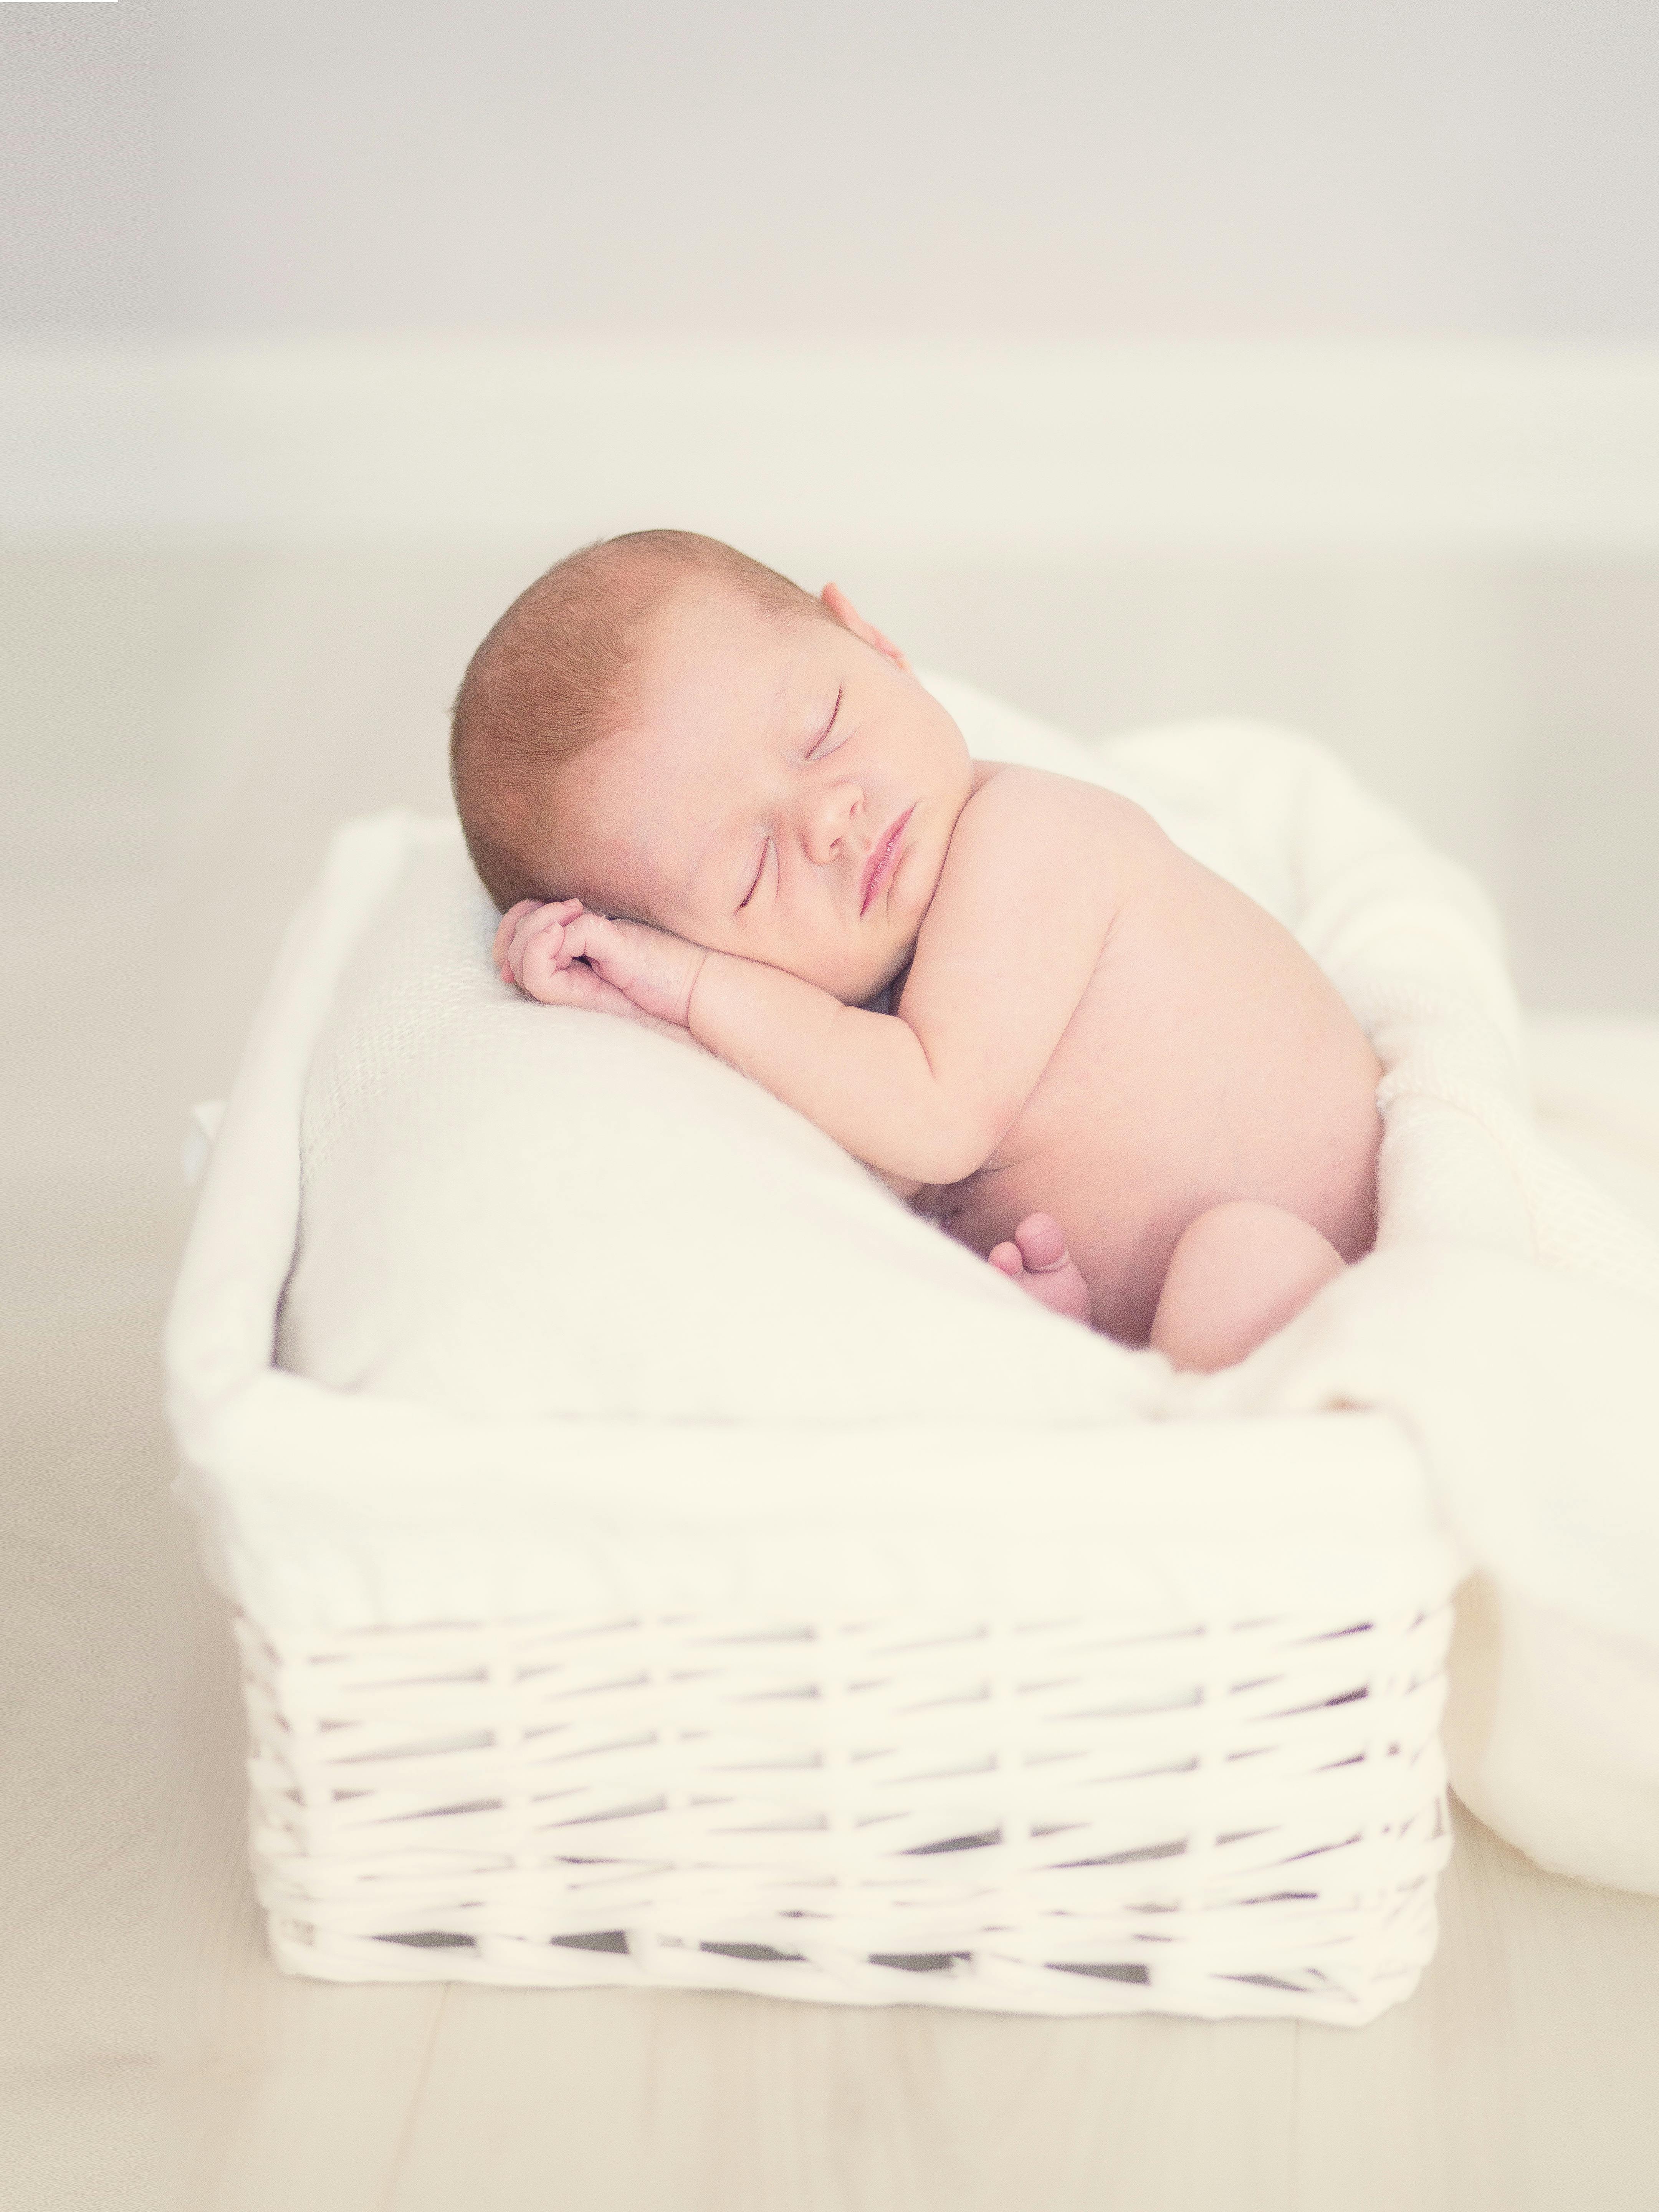 An infant sleeping in his own crib. | Photo: Pexels